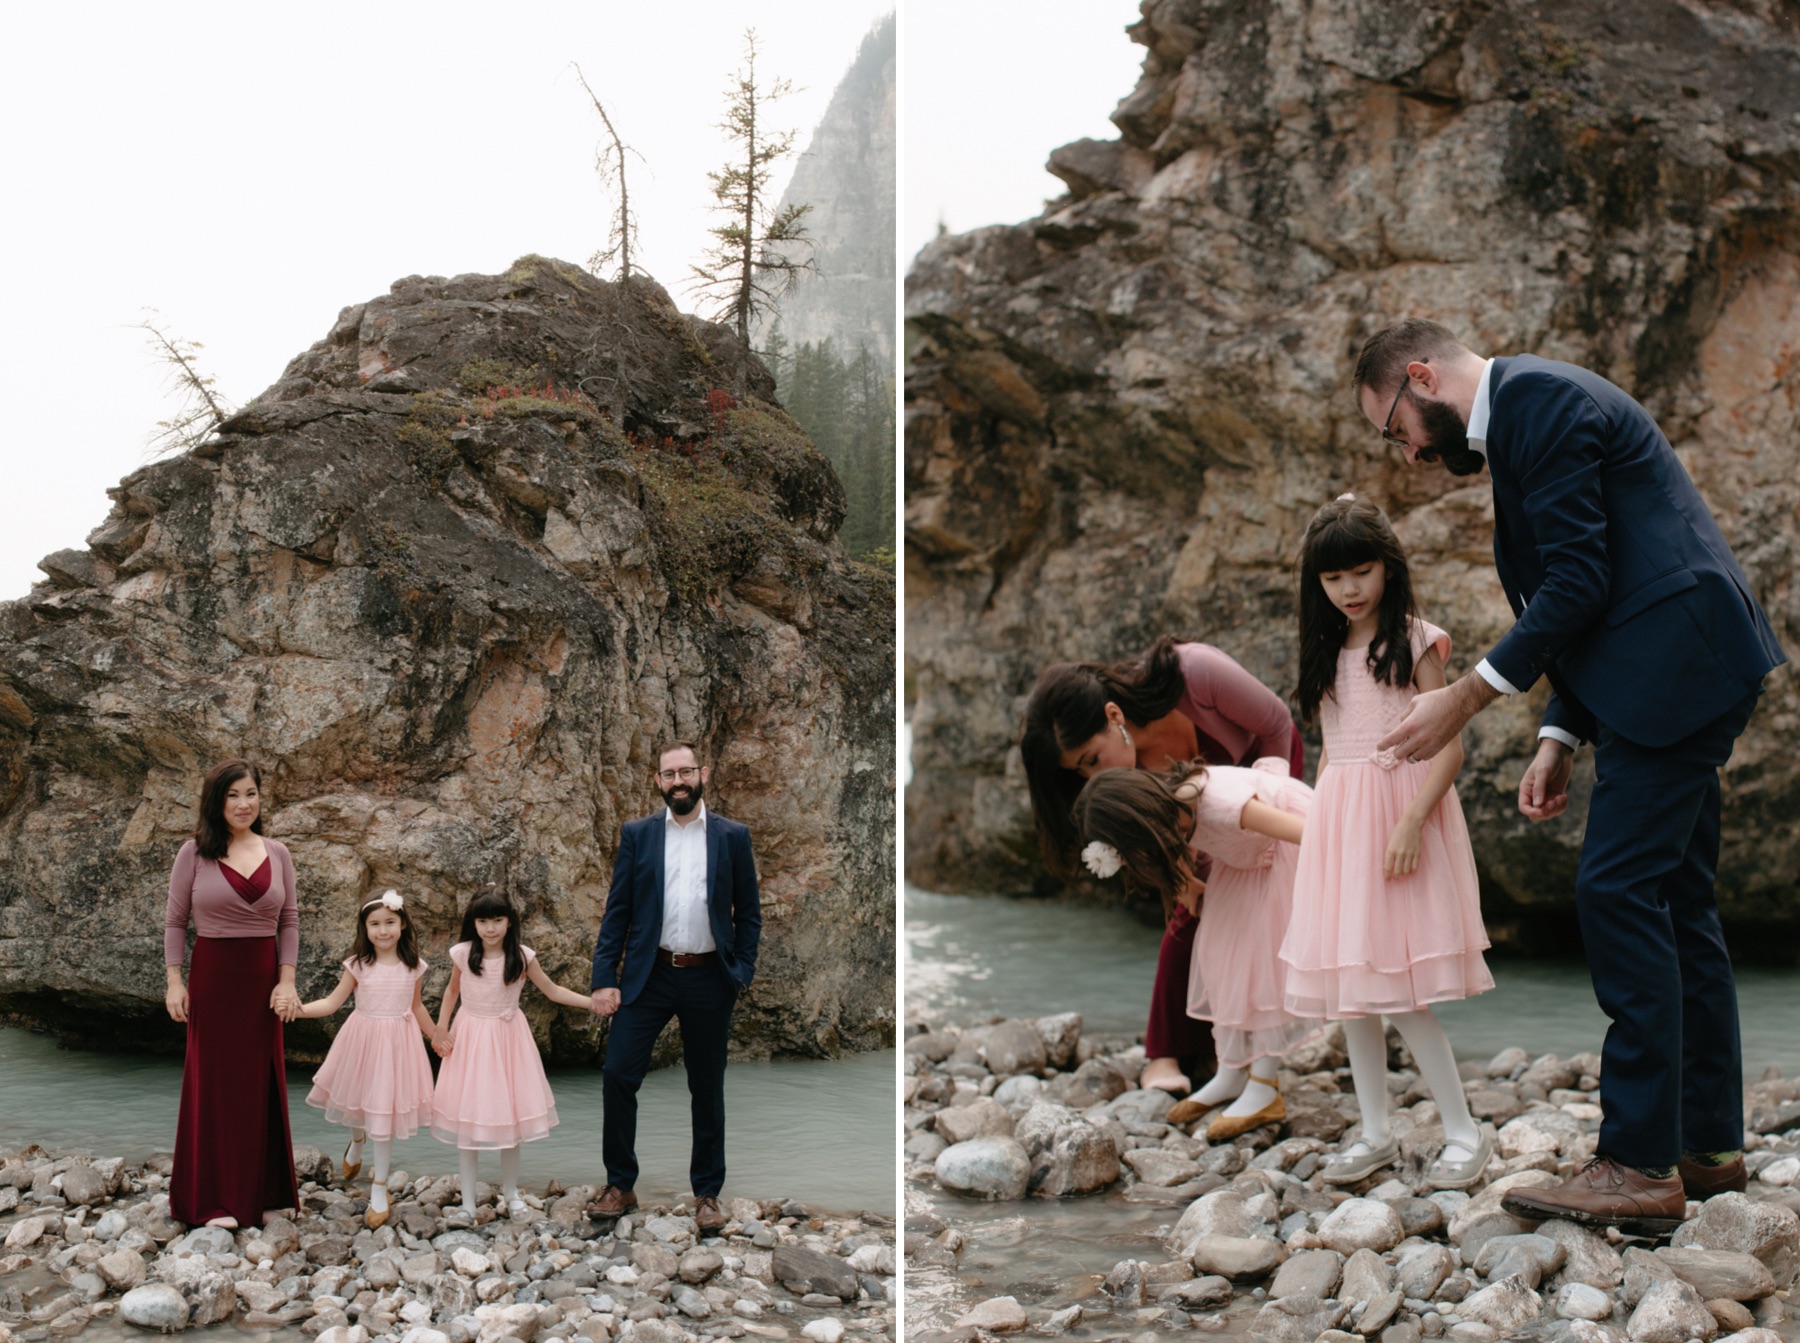 Family portraiture at vow renewal along glacial river with family holding hands and smiling